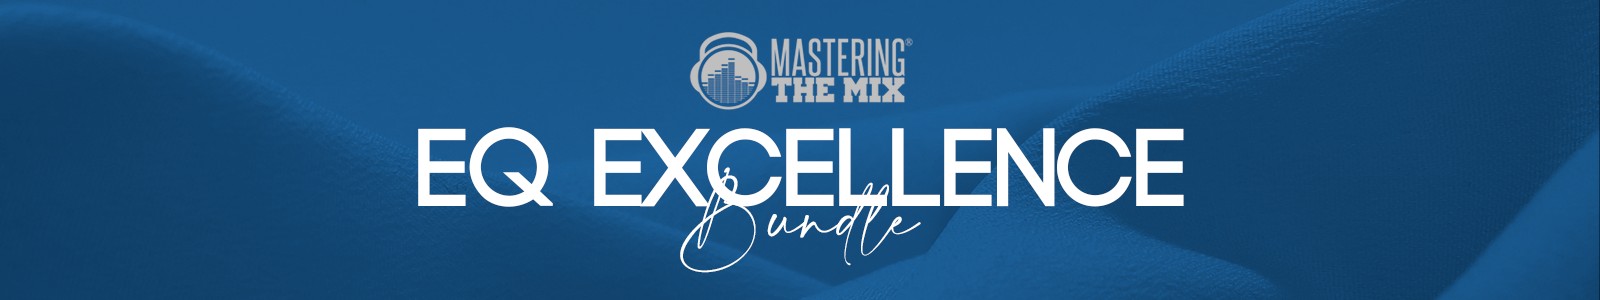 EQ Excellence Bundle by Mastering the Mix